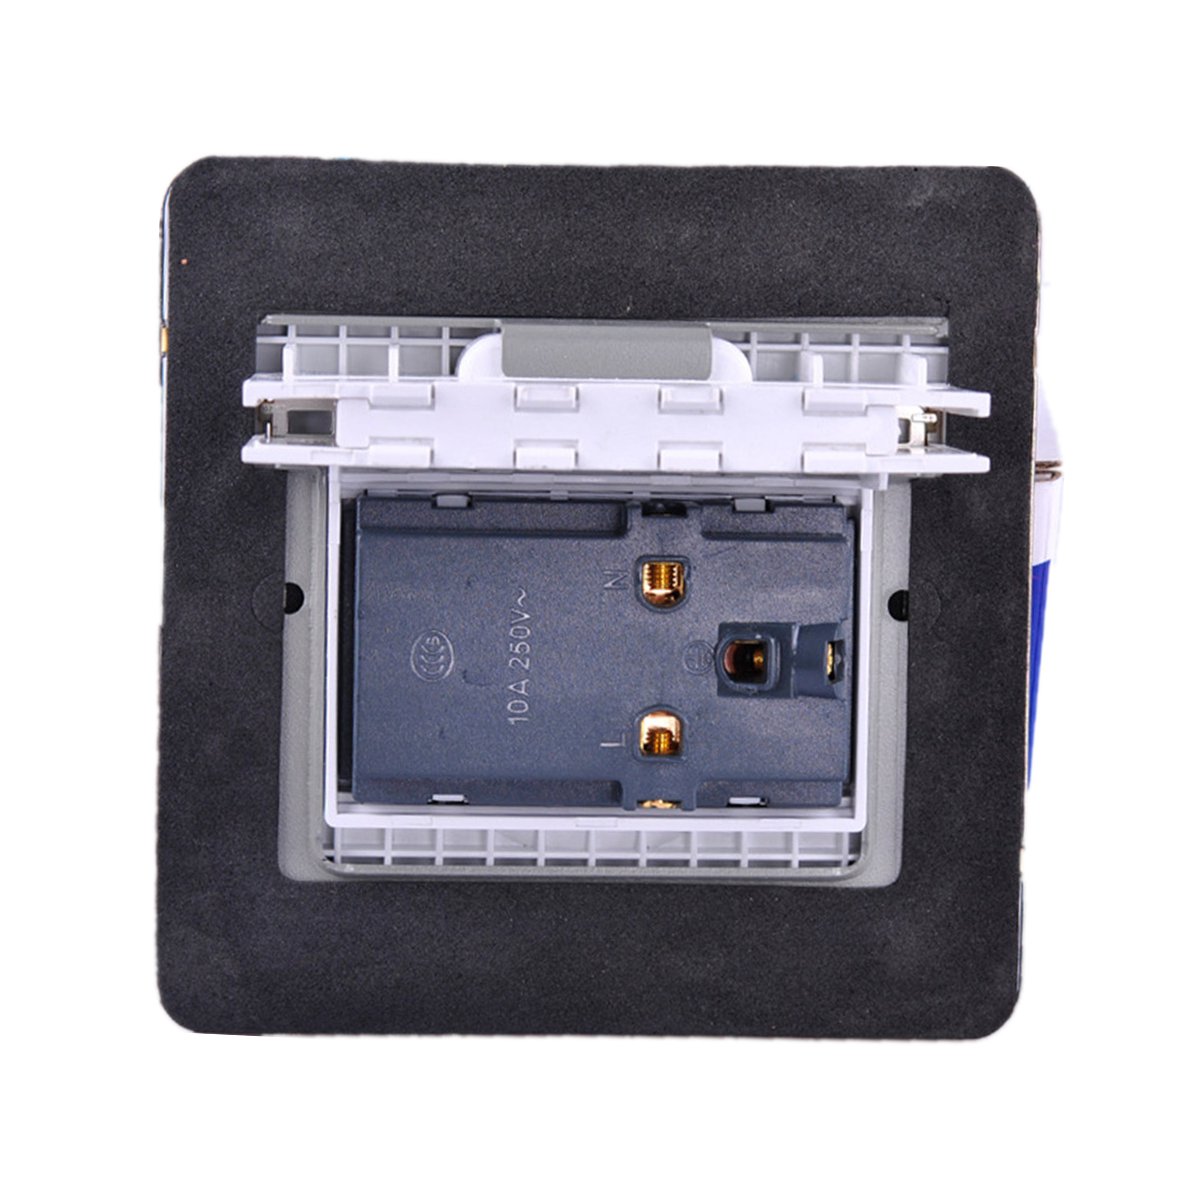 10A-Floor-Wall-Plate-Ground-Power-Outlet-Universal-Power-Socket-Charger-Receptacle-1510214-7